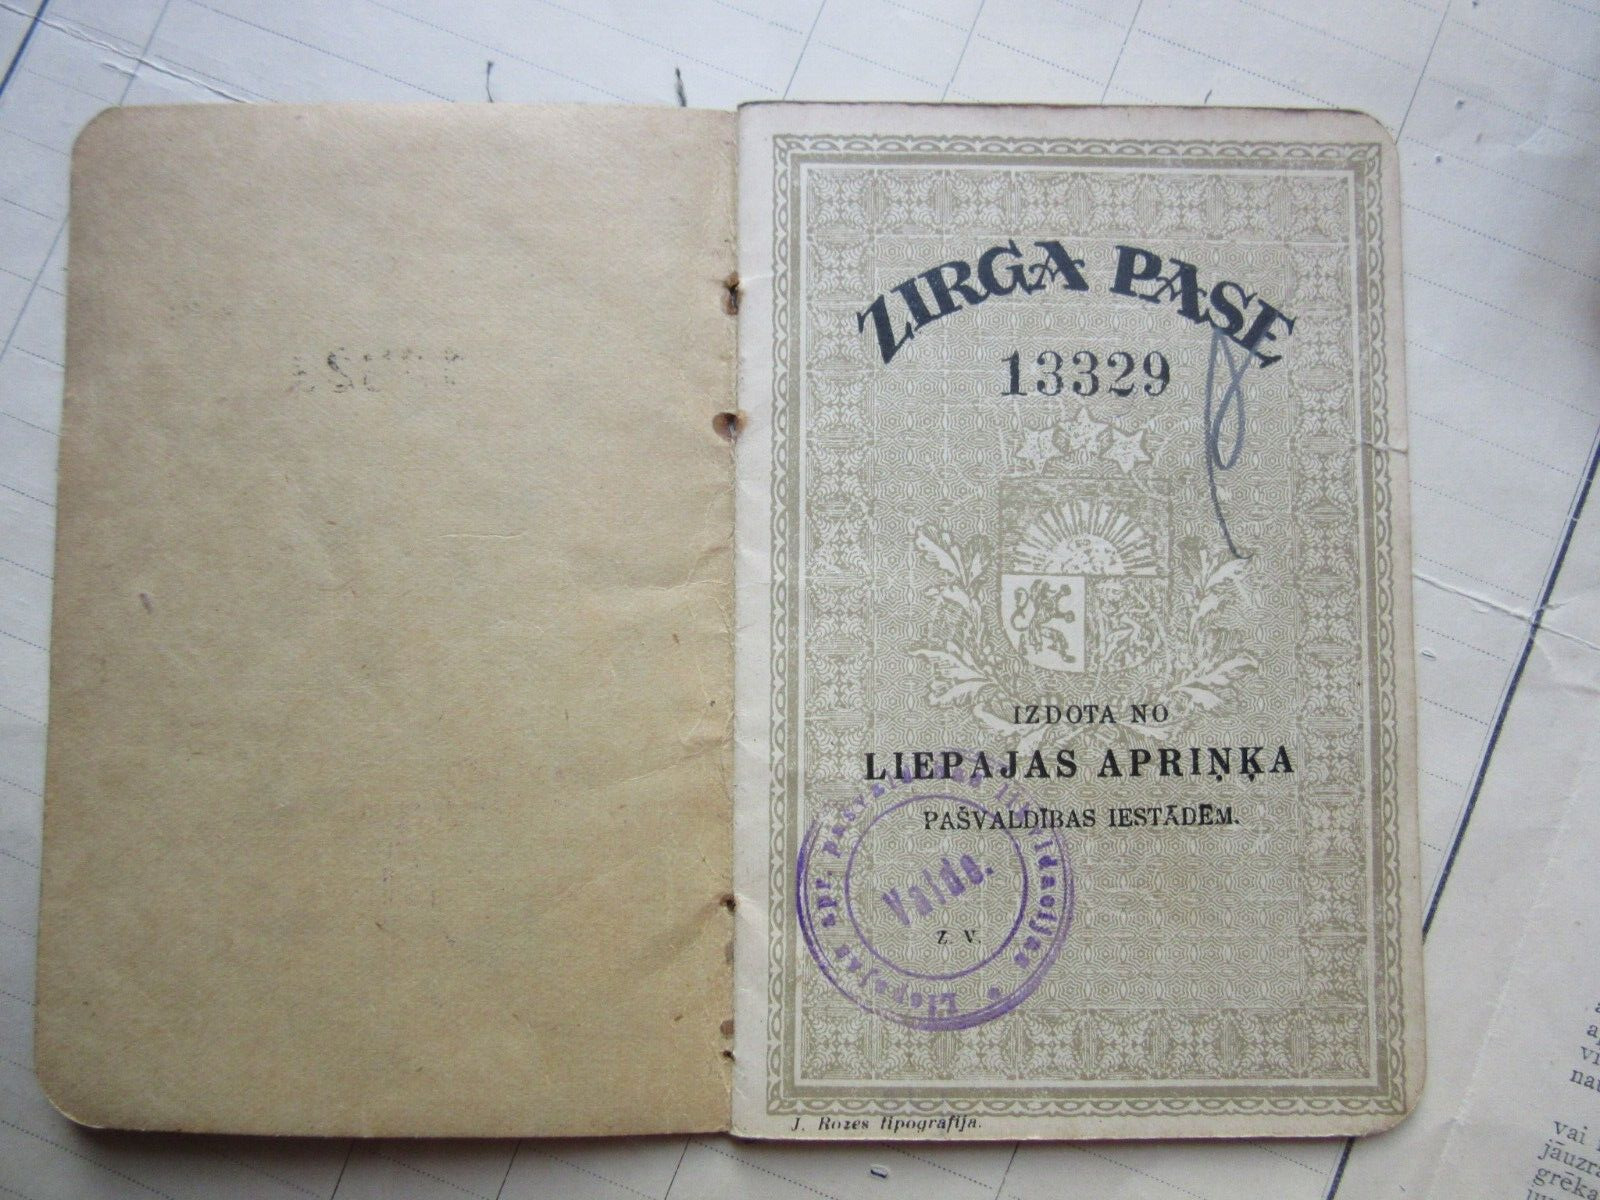 y1929 Passport for HORSE / issued in Liepaja reg. Latvia